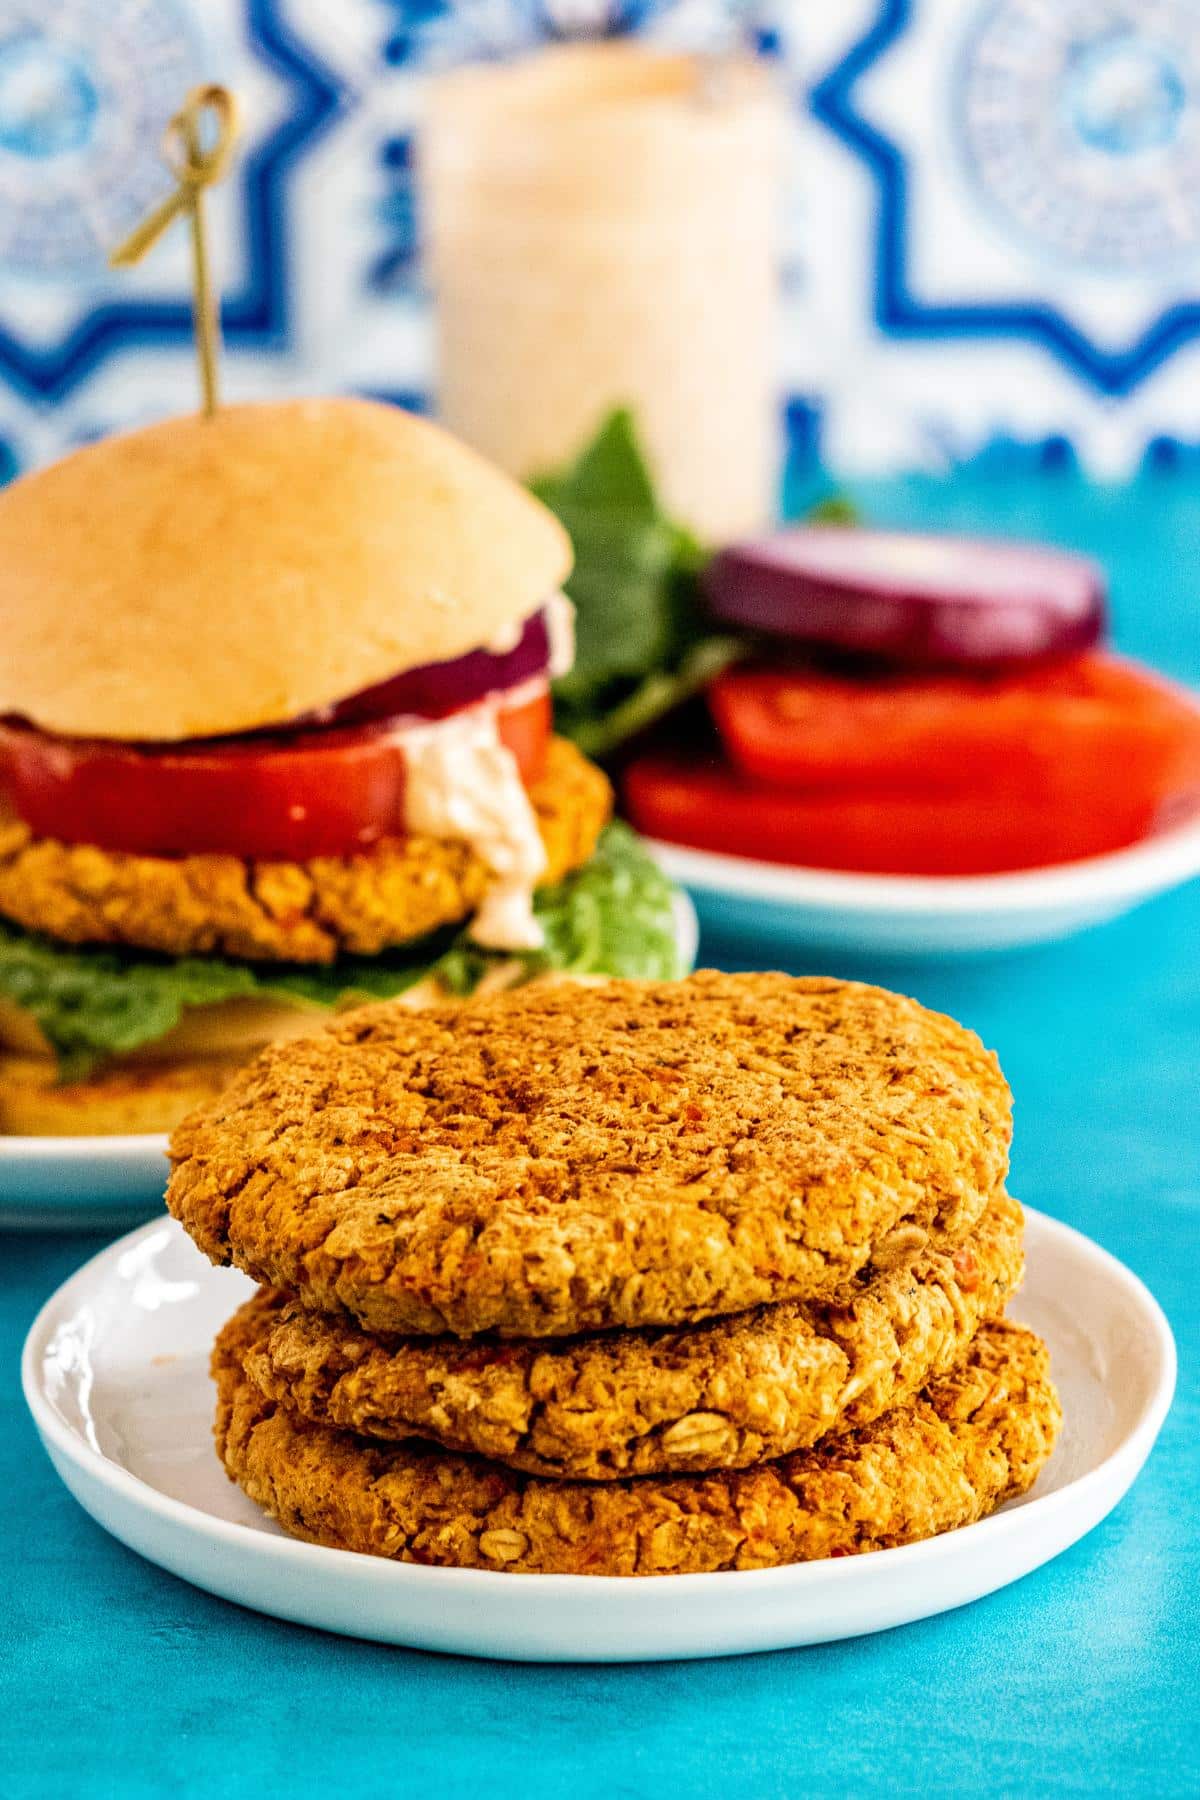 3 chickpea burger patties on a plate with a chickpea burger, plate of lettuce, tomato and onion slices, and a jar of sauce in the background.